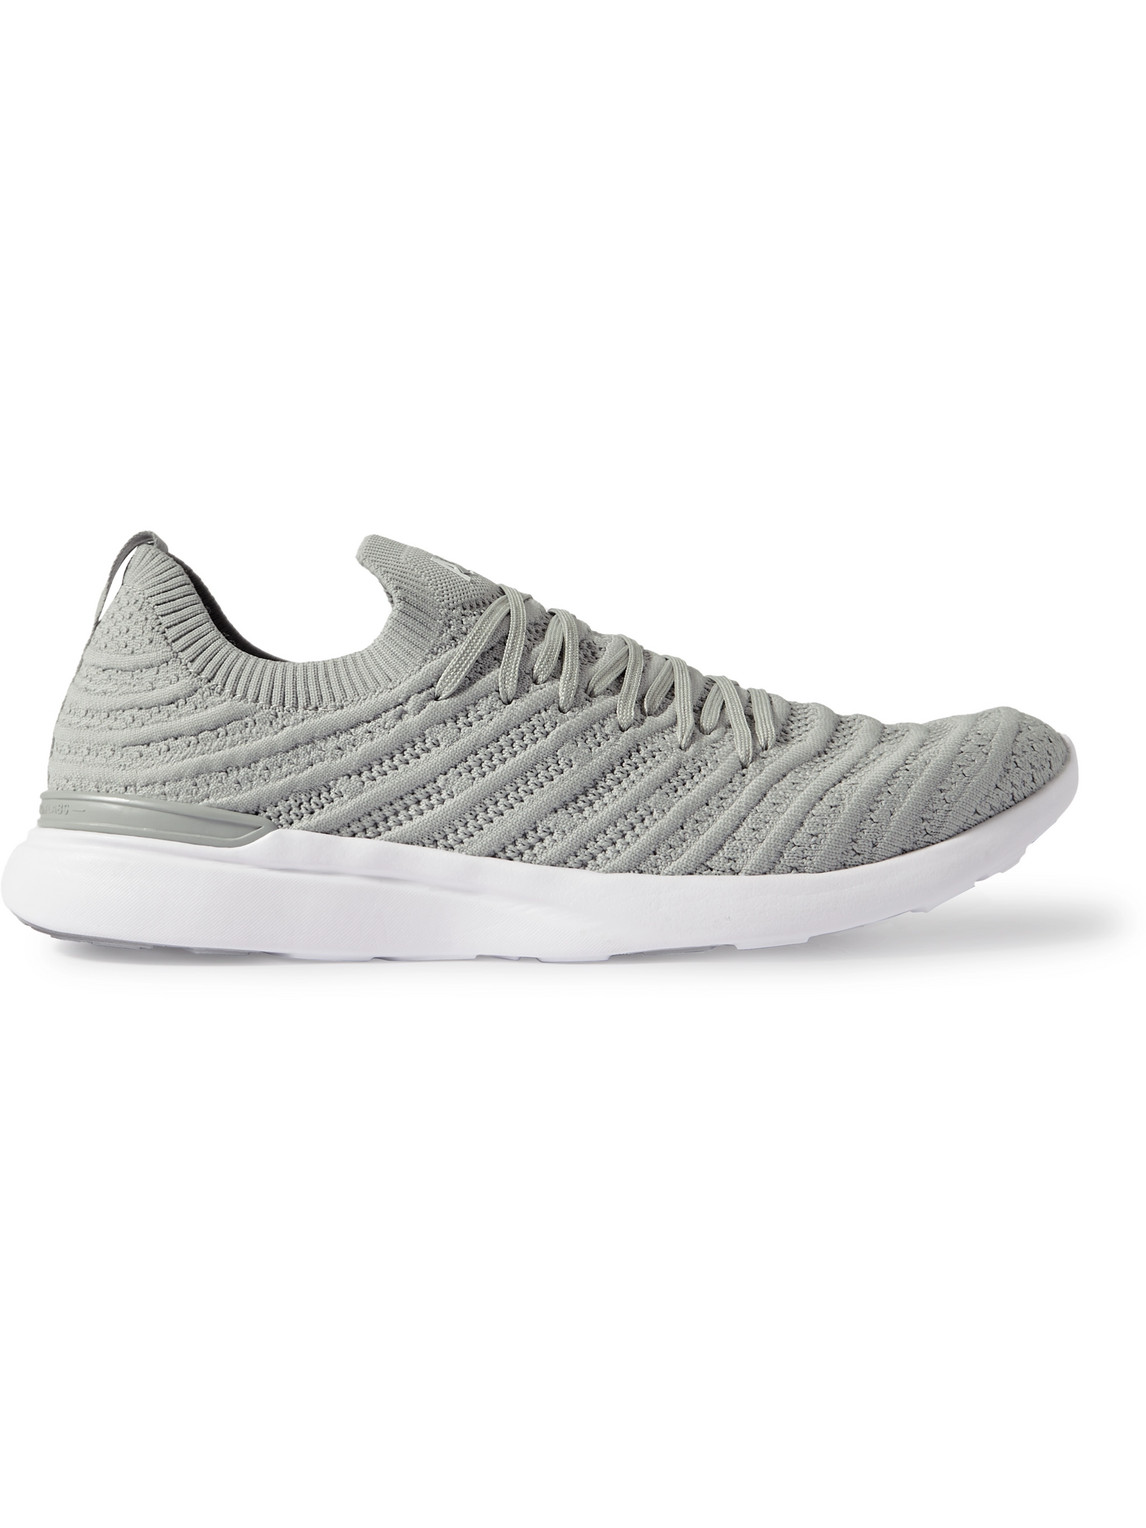 Apl Athletic Propulsion Labs Wave Techloom Running Sneakers In Gray